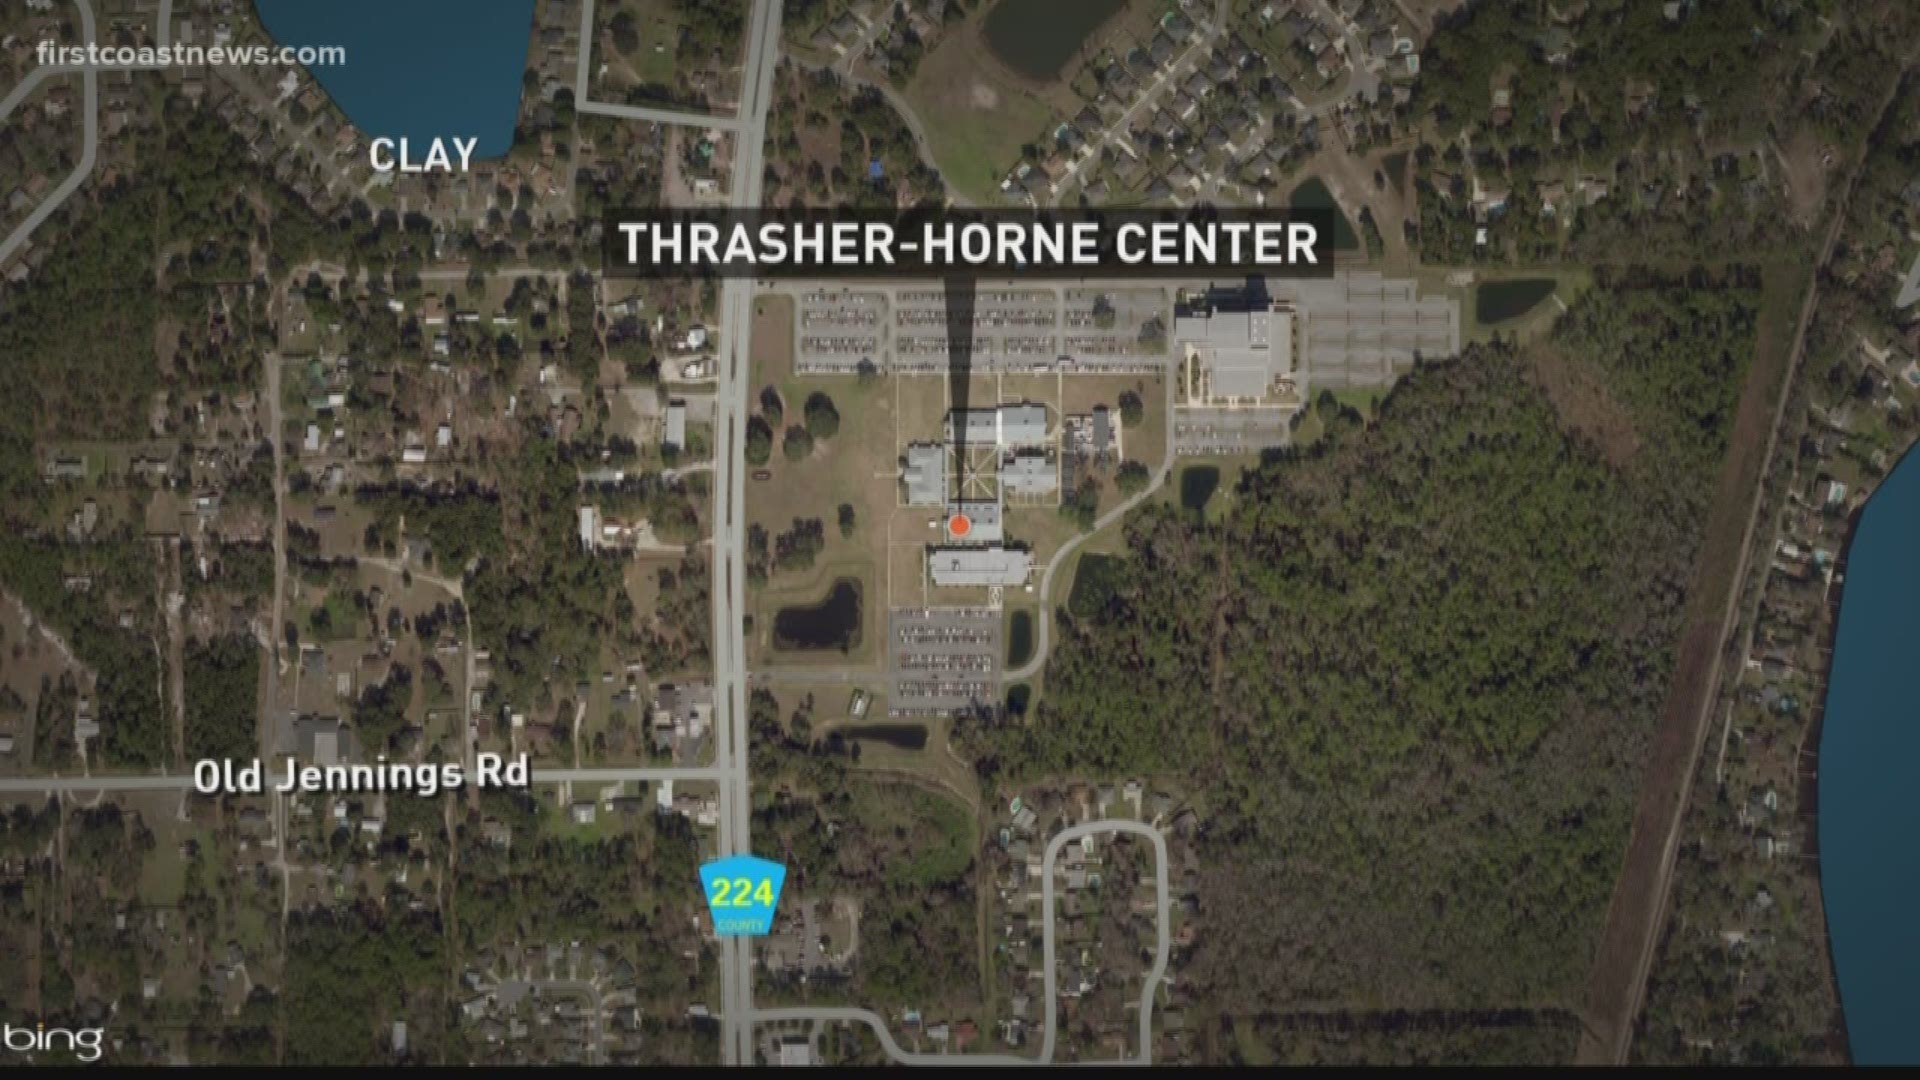 Two people suffered burns after an oxygen tank malfunctioned during an event at the Thrasher-Horne Center.